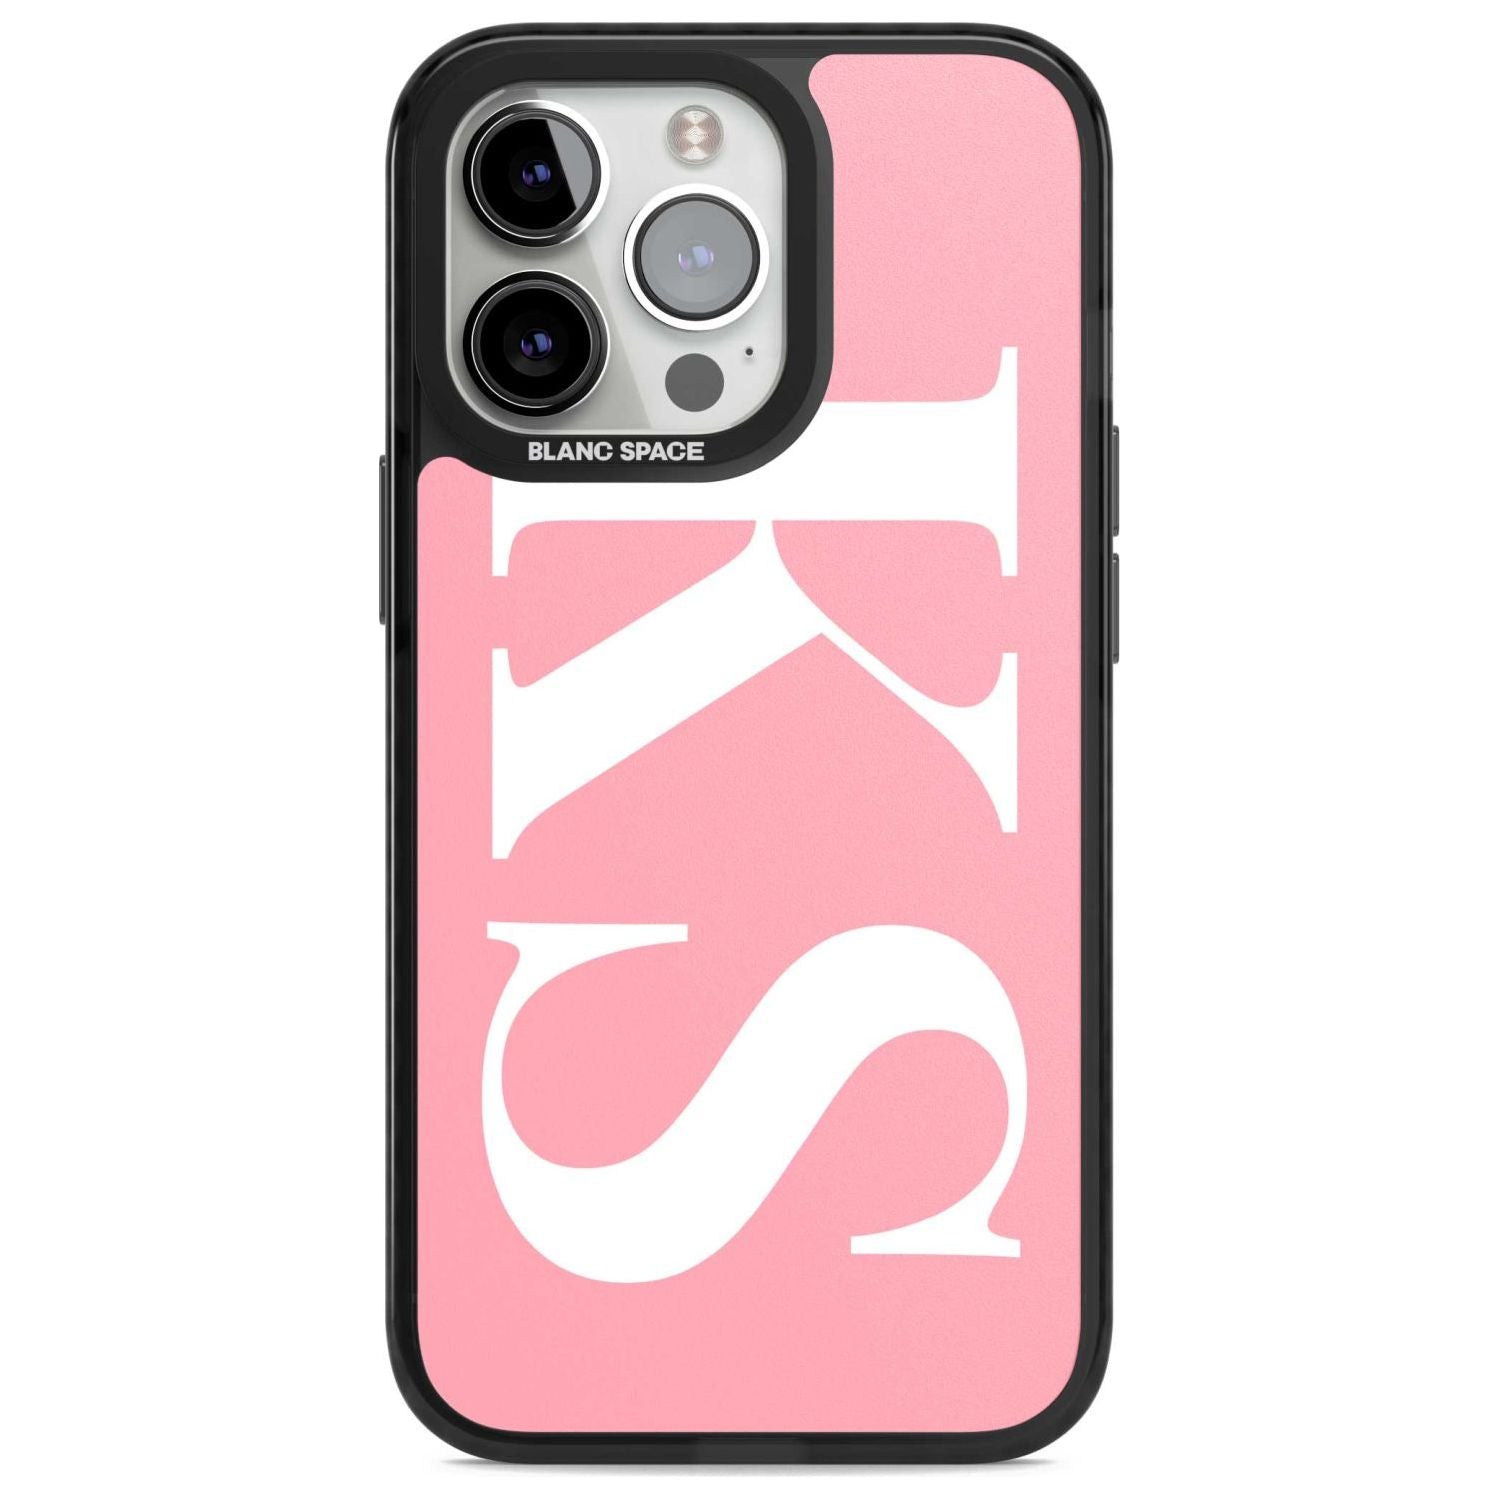 Personalised White & Pink Letters Custom Phone Case iPhone 15 Pro Max / Magsafe Black Impact Case,iPhone 15 Pro / Magsafe Black Impact Case,iPhone 14 Pro Max / Magsafe Black Impact Case,iPhone 14 Pro / Magsafe Black Impact Case,iPhone 13 Pro / Magsafe Black Impact Case Blanc Space